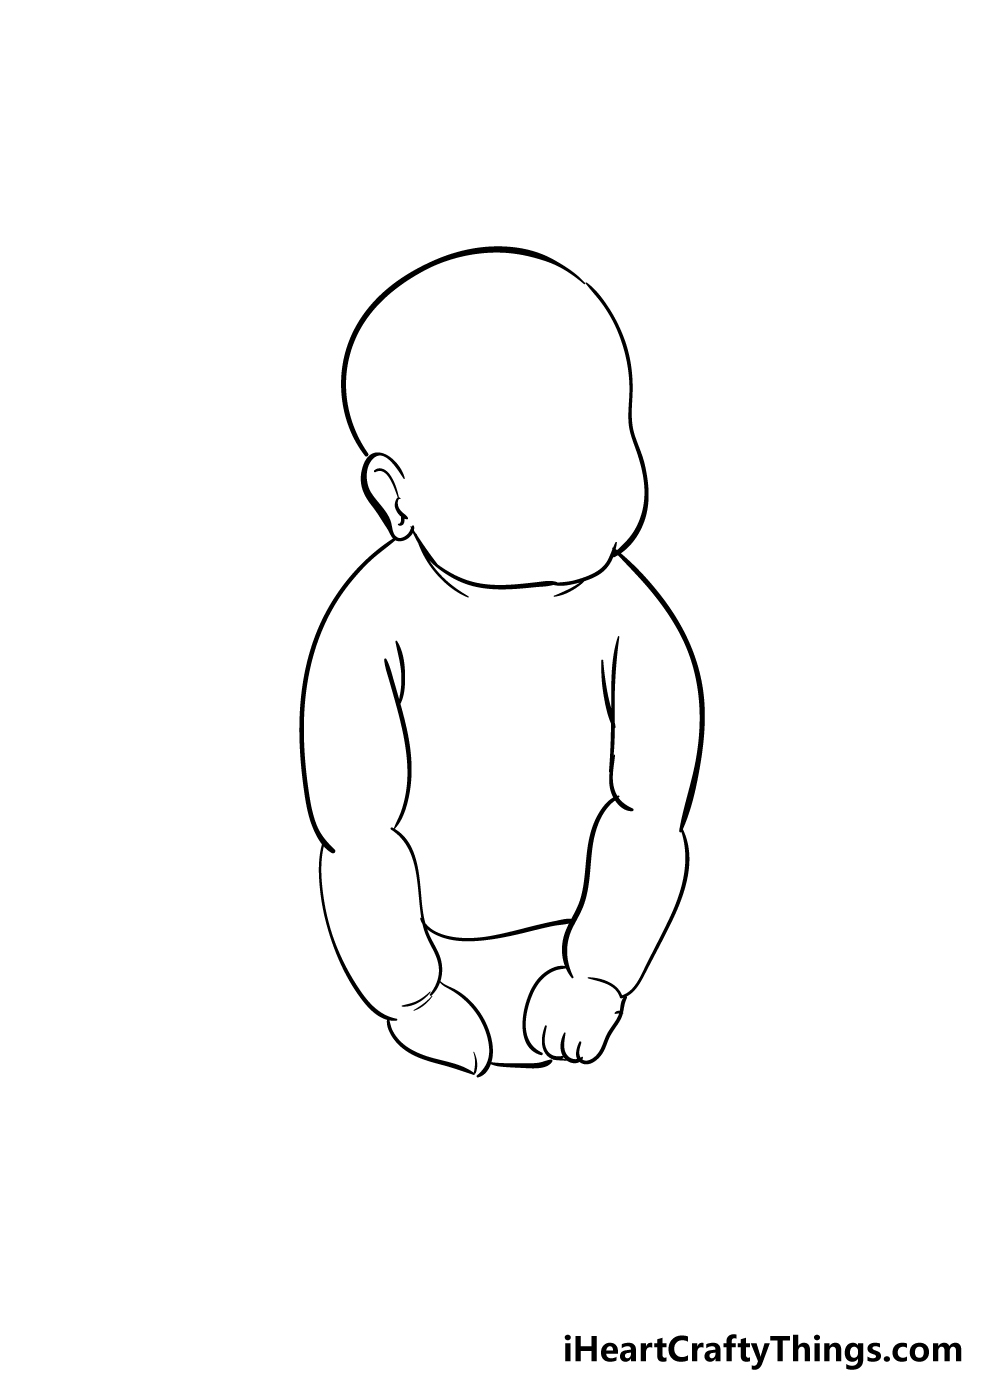 Baby Drawing - How To Draw A Baby Step By Step